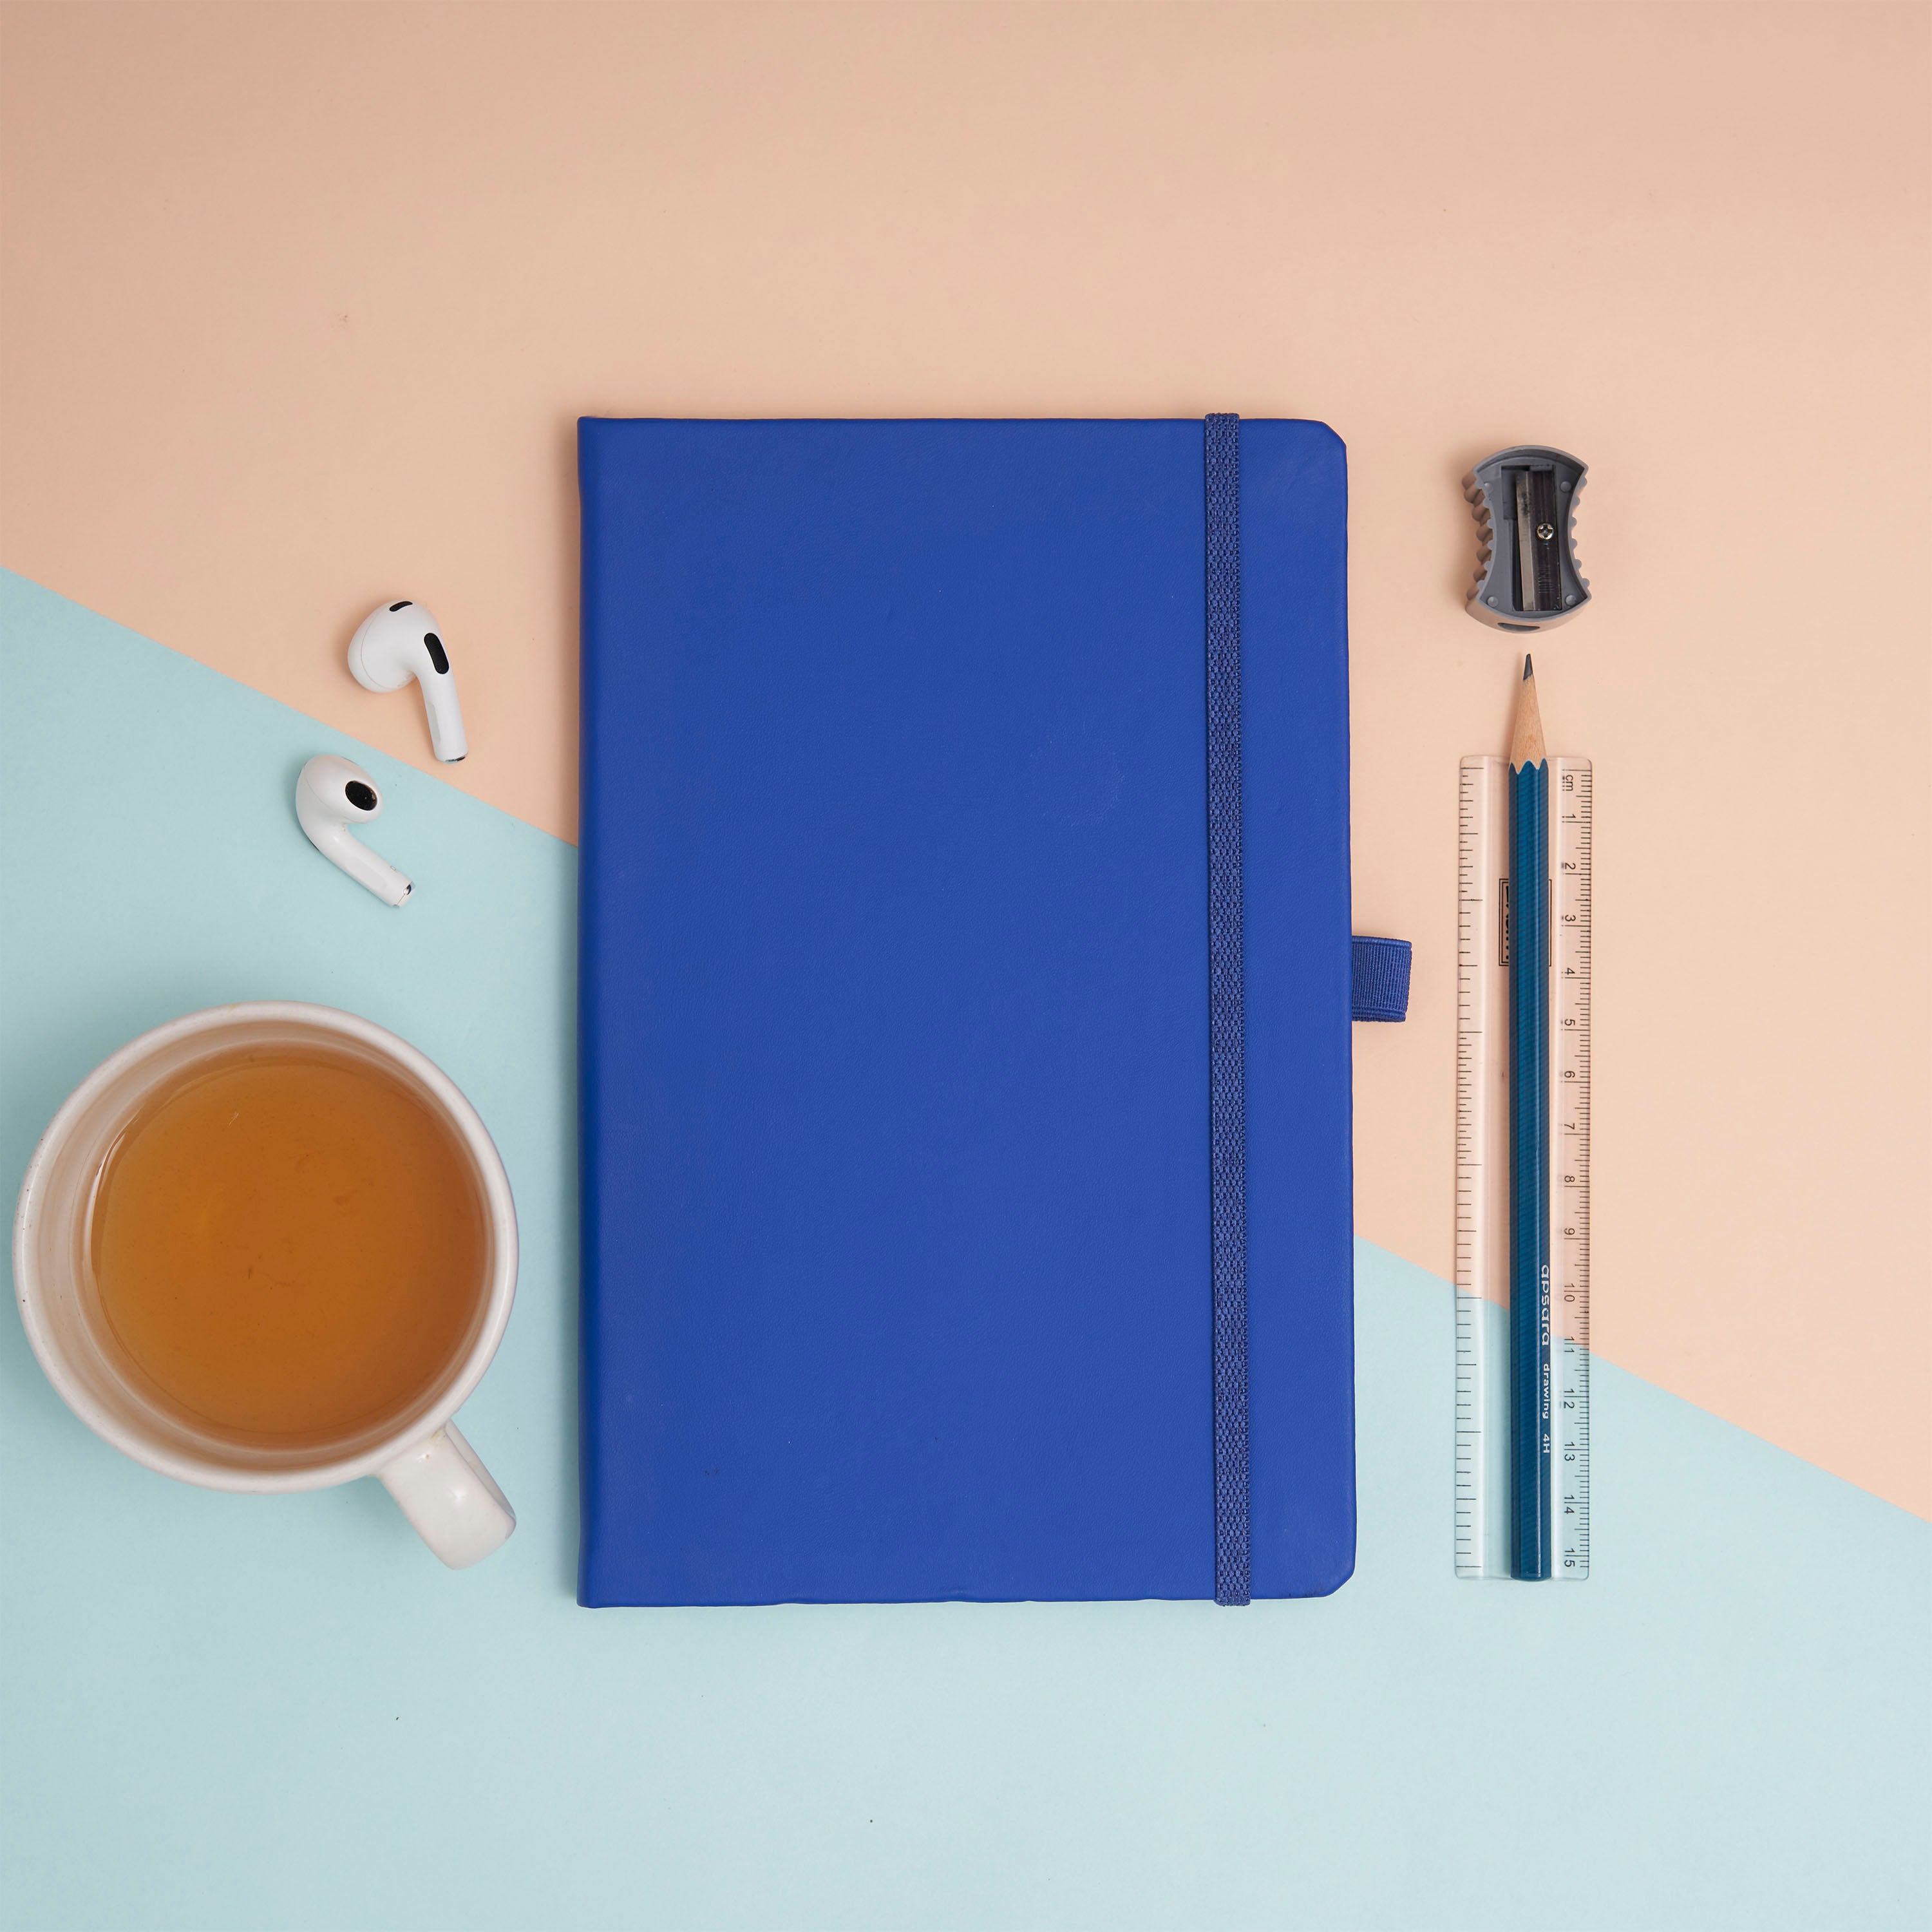 Pro Series Executive A5 PU Leather Hardbound Ruled Diary with Pen Loop - BLUE